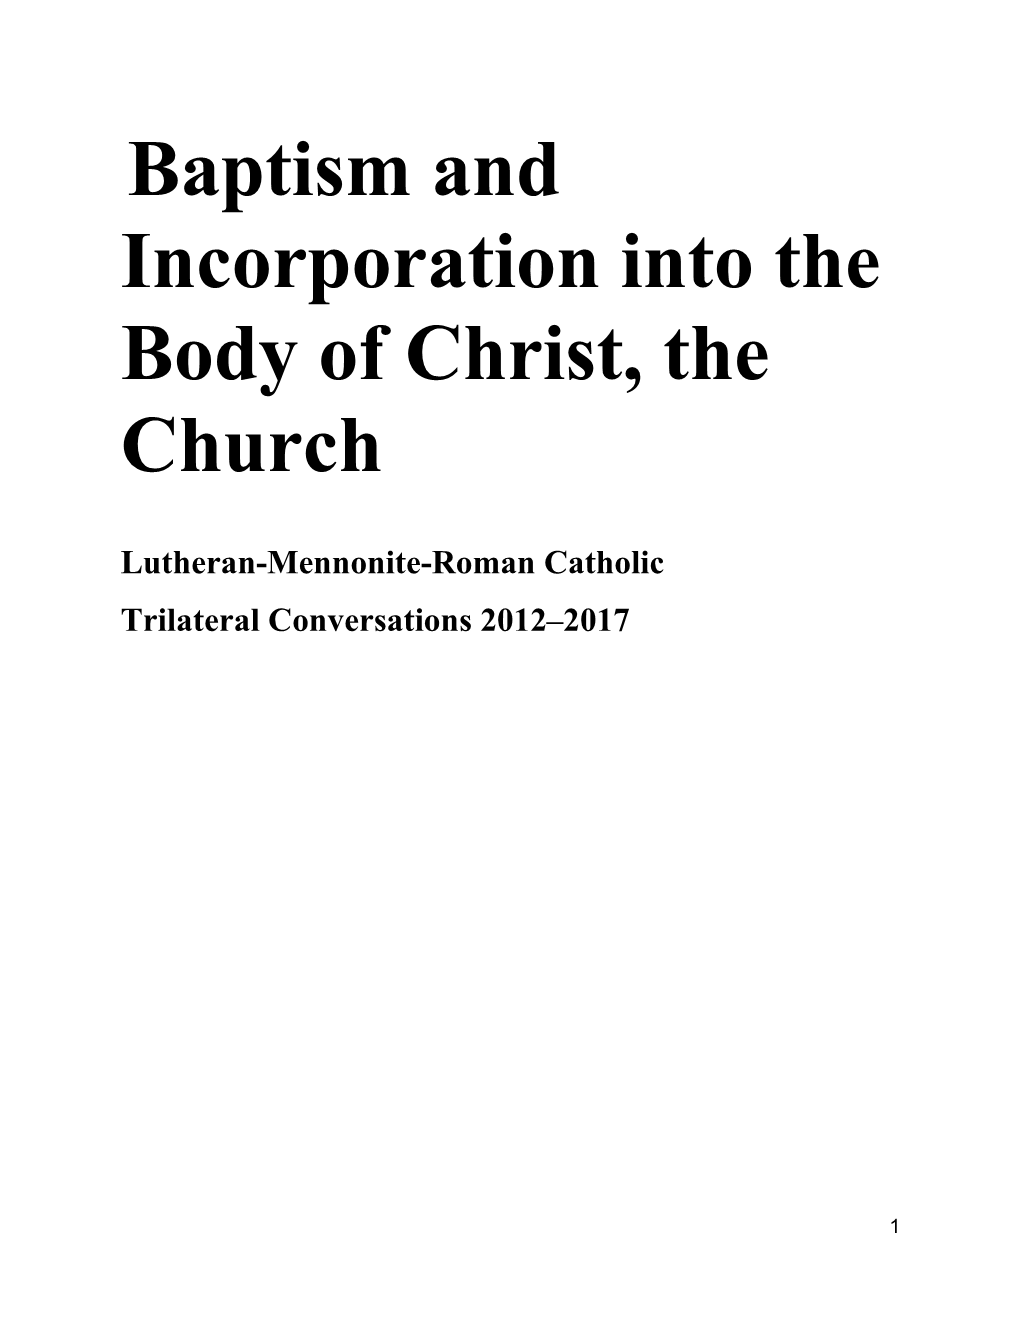 Baptism and Incorporation Into the Body of Christ, the Church